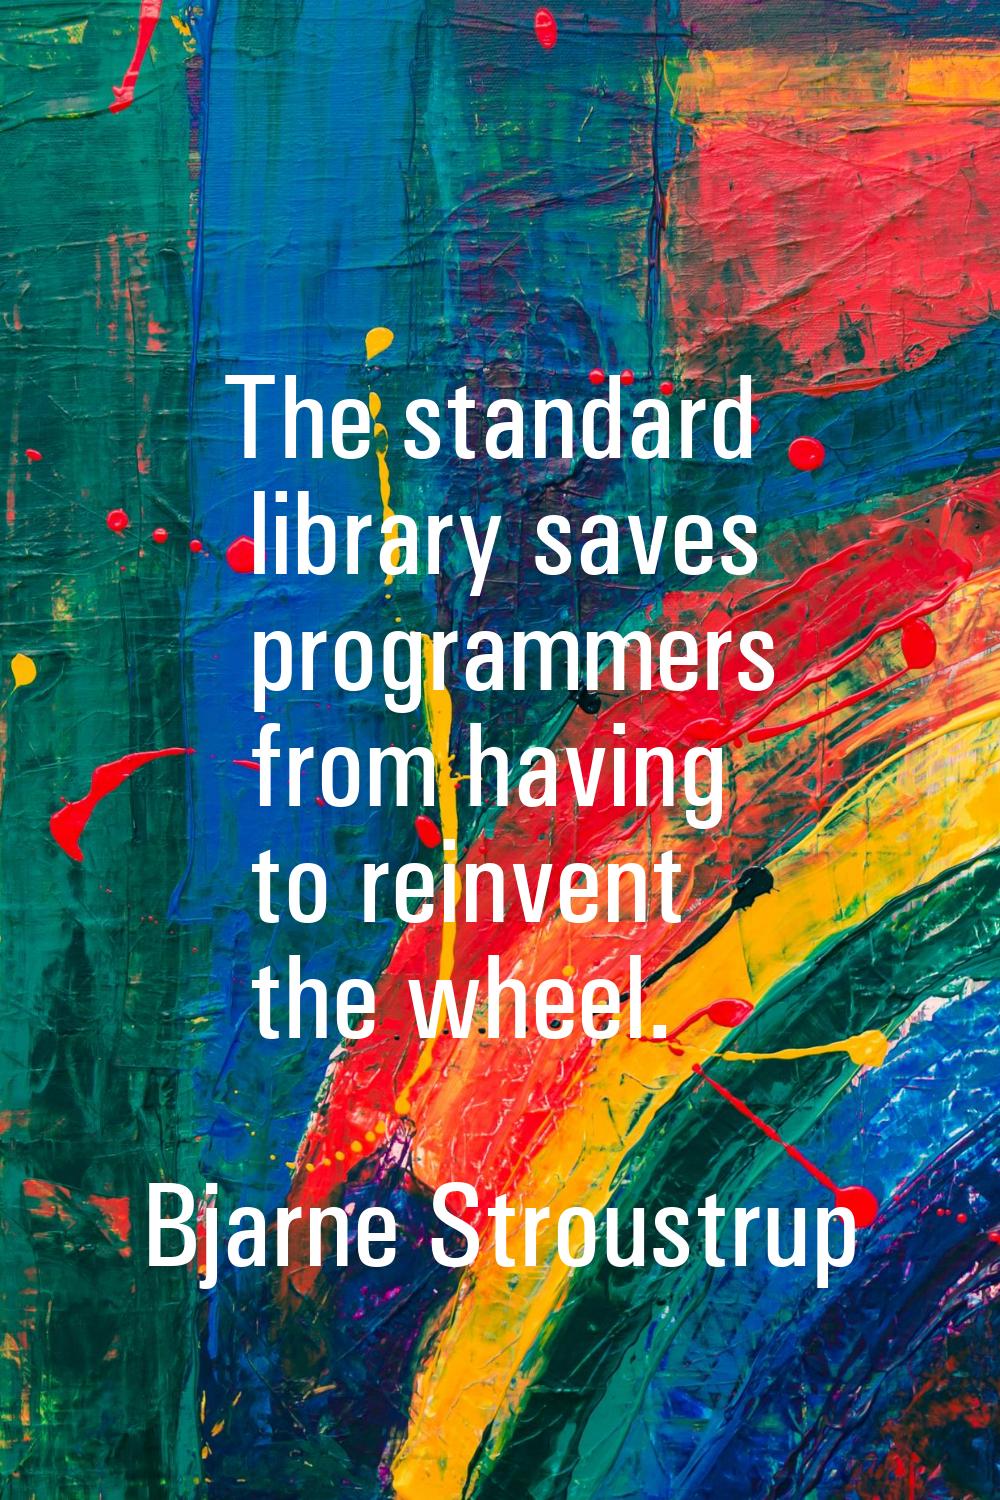 The standard library saves programmers from having to reinvent the wheel.